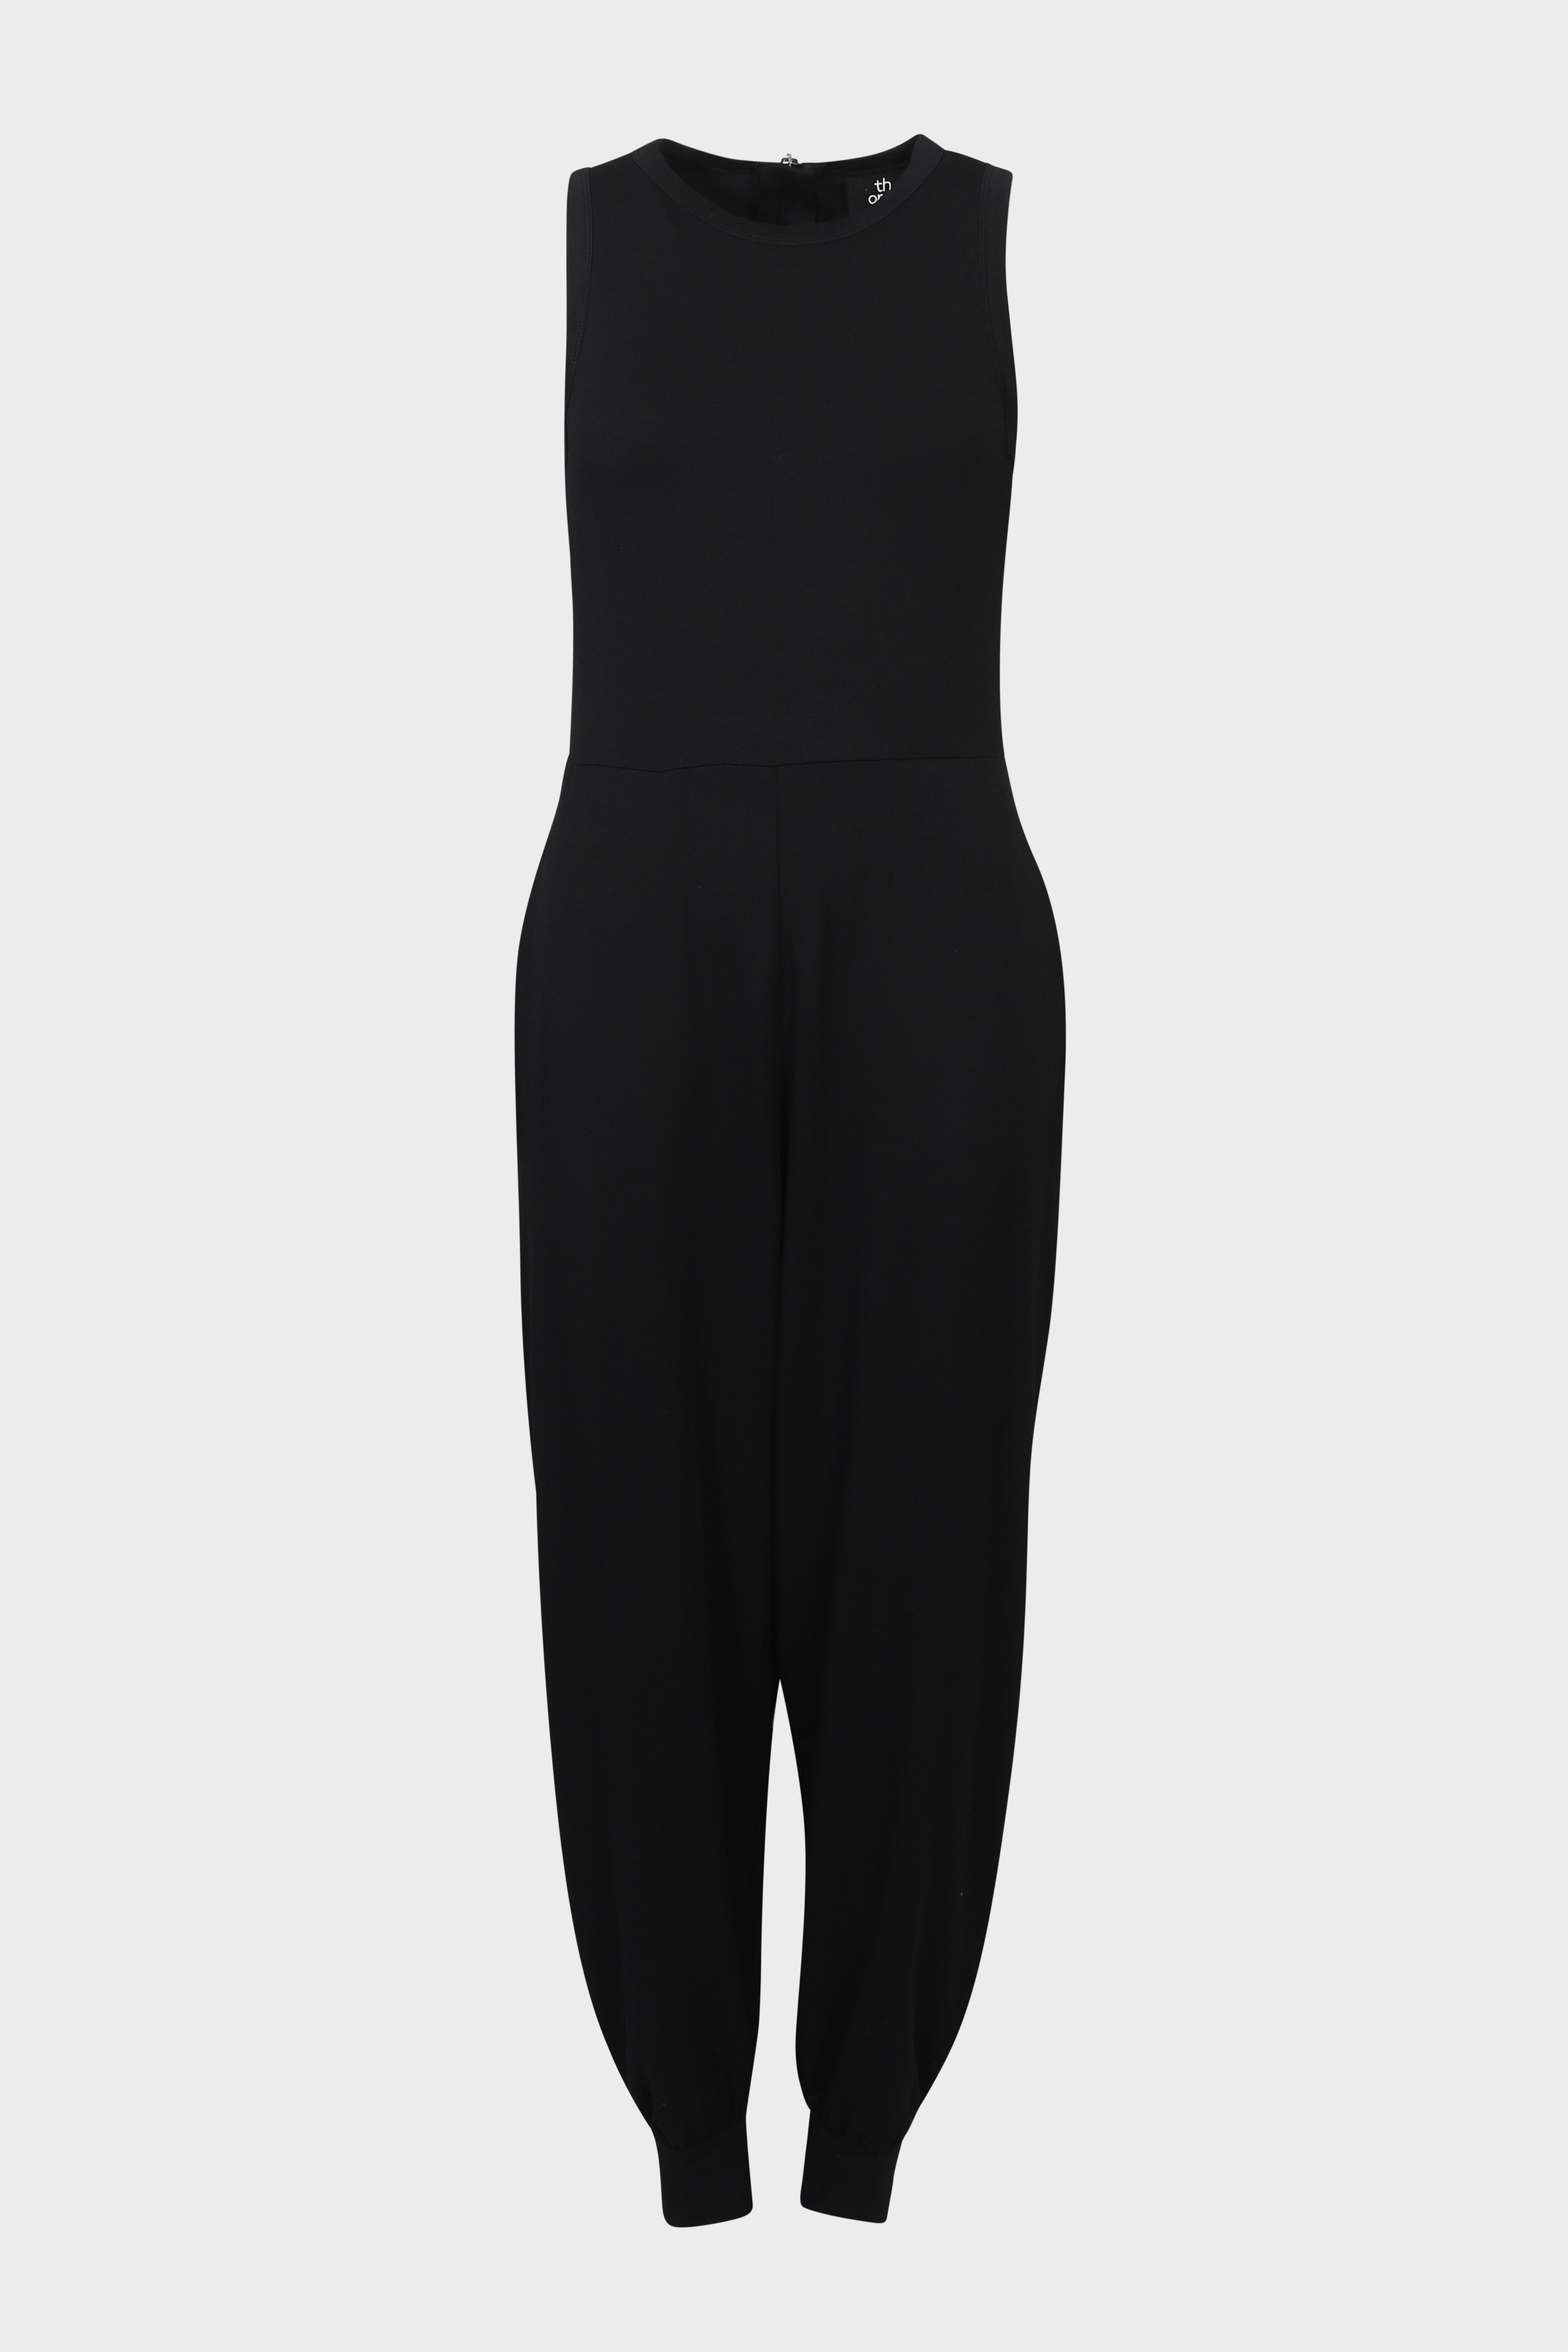 THOM KROM Overall in Black